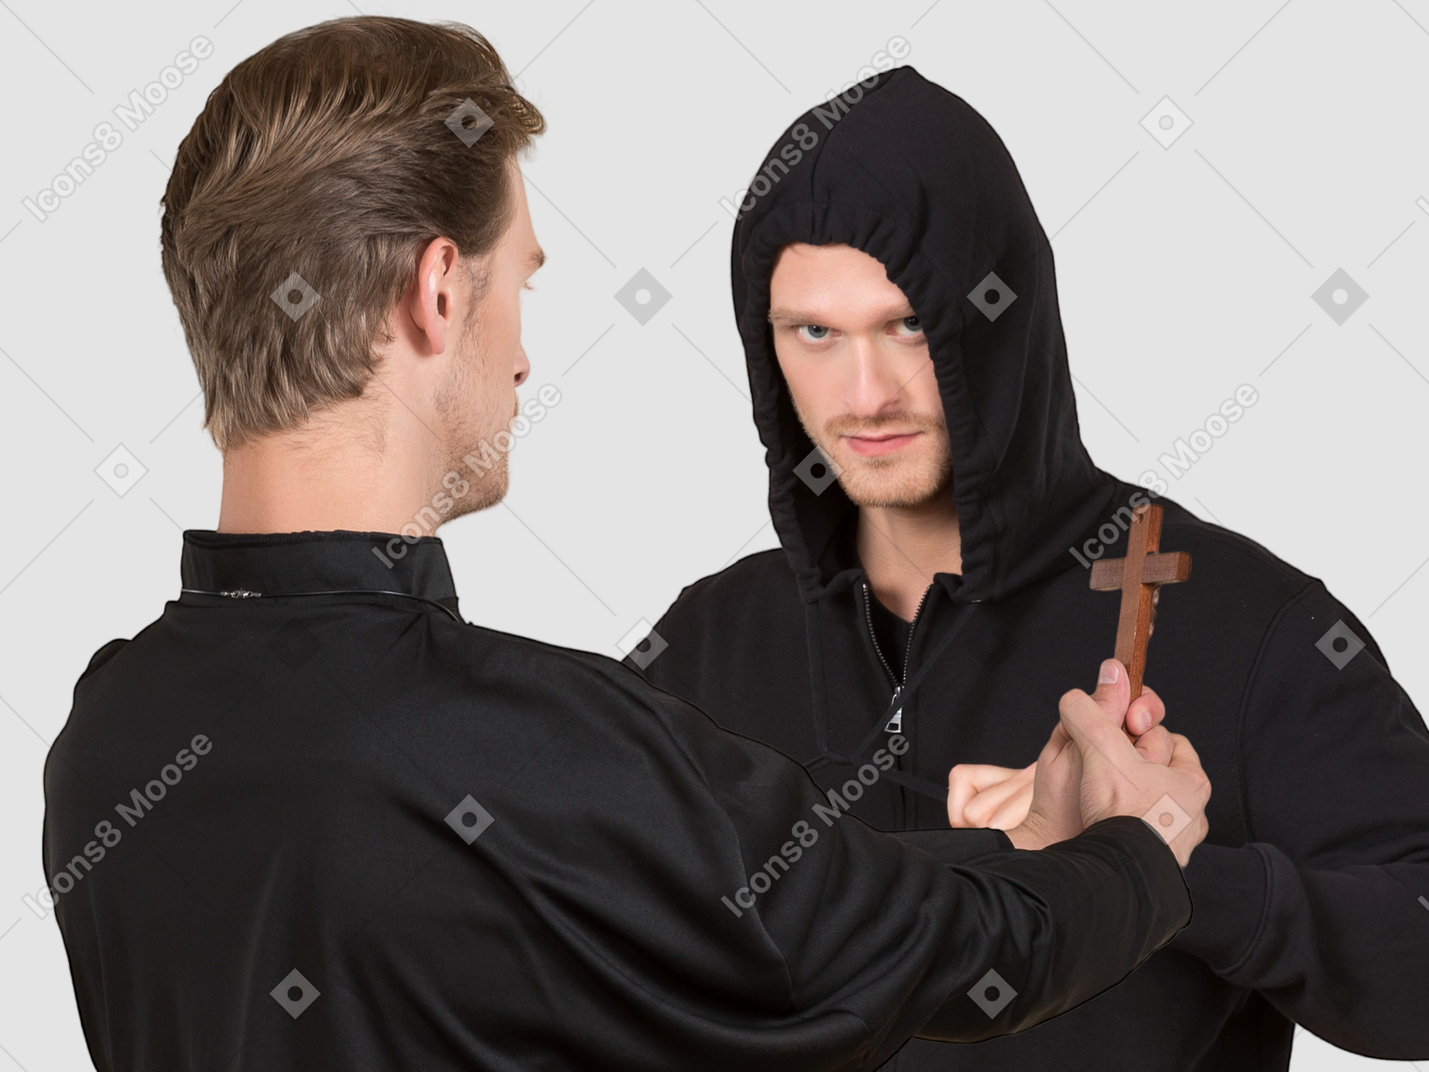 Priest stopping a man with cross